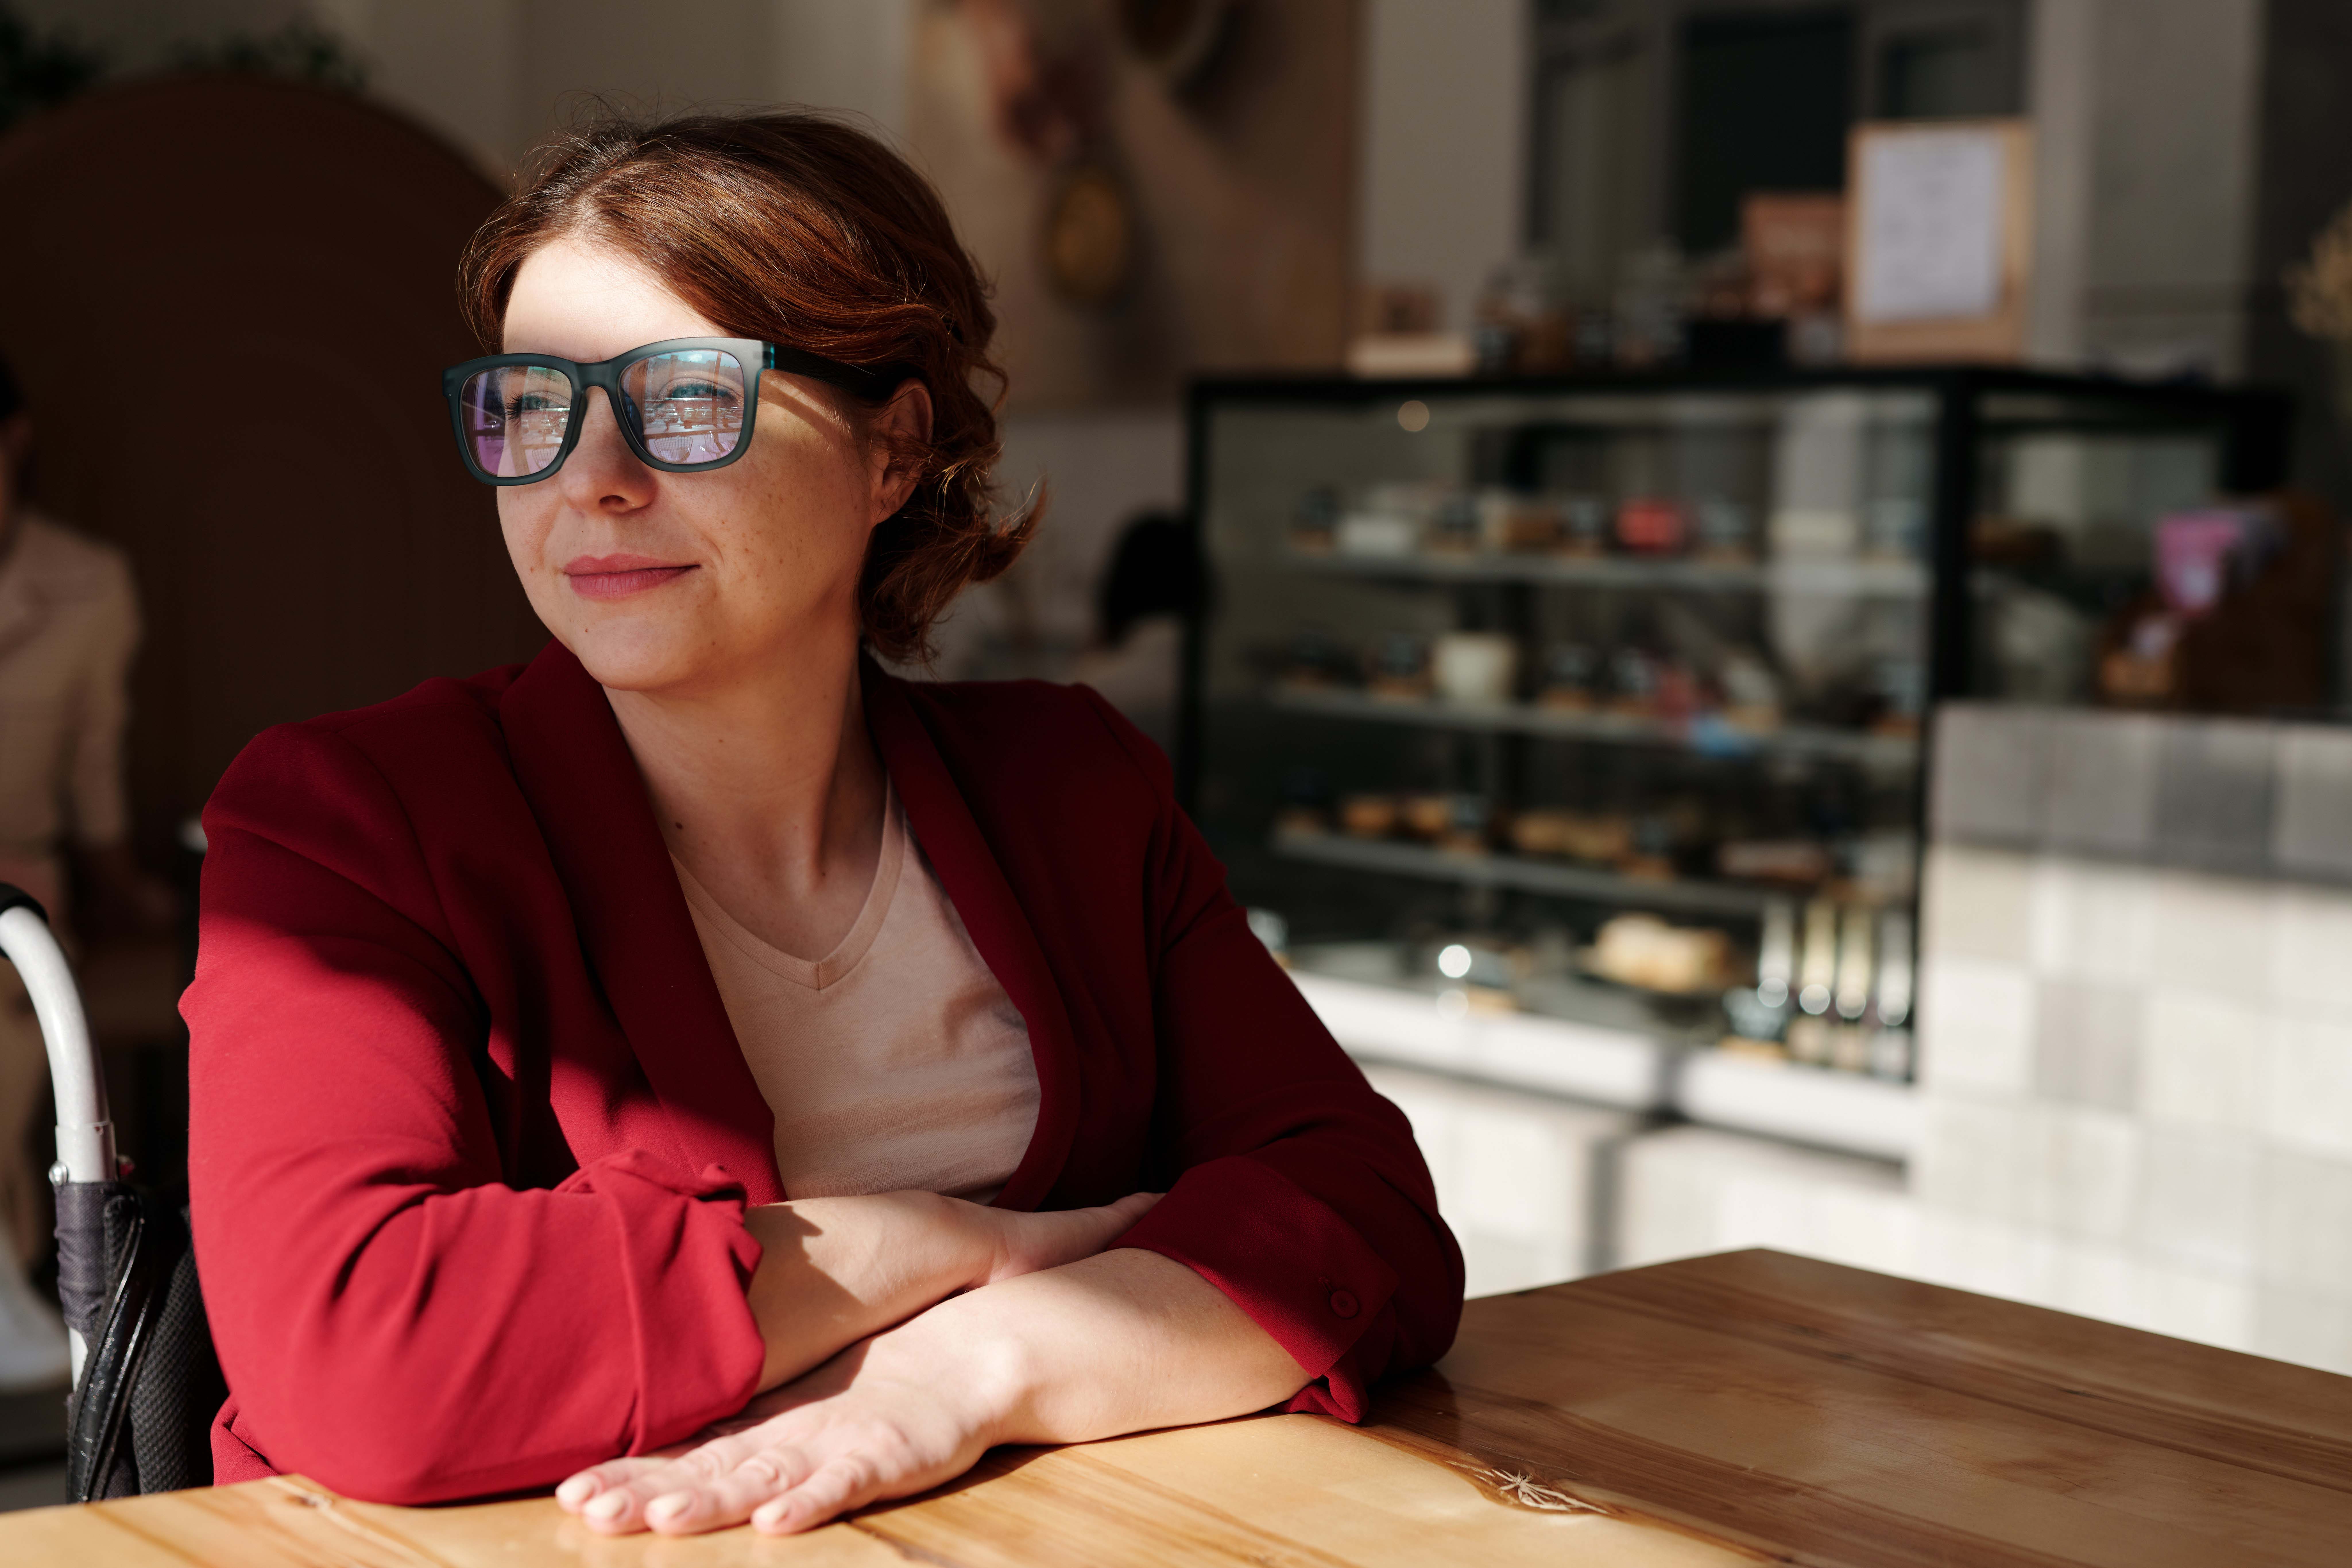 Woman in coffee shop looking towards a window with sun shining across her. She's wearing a red long sleeved jacket and black rimmed glasses.